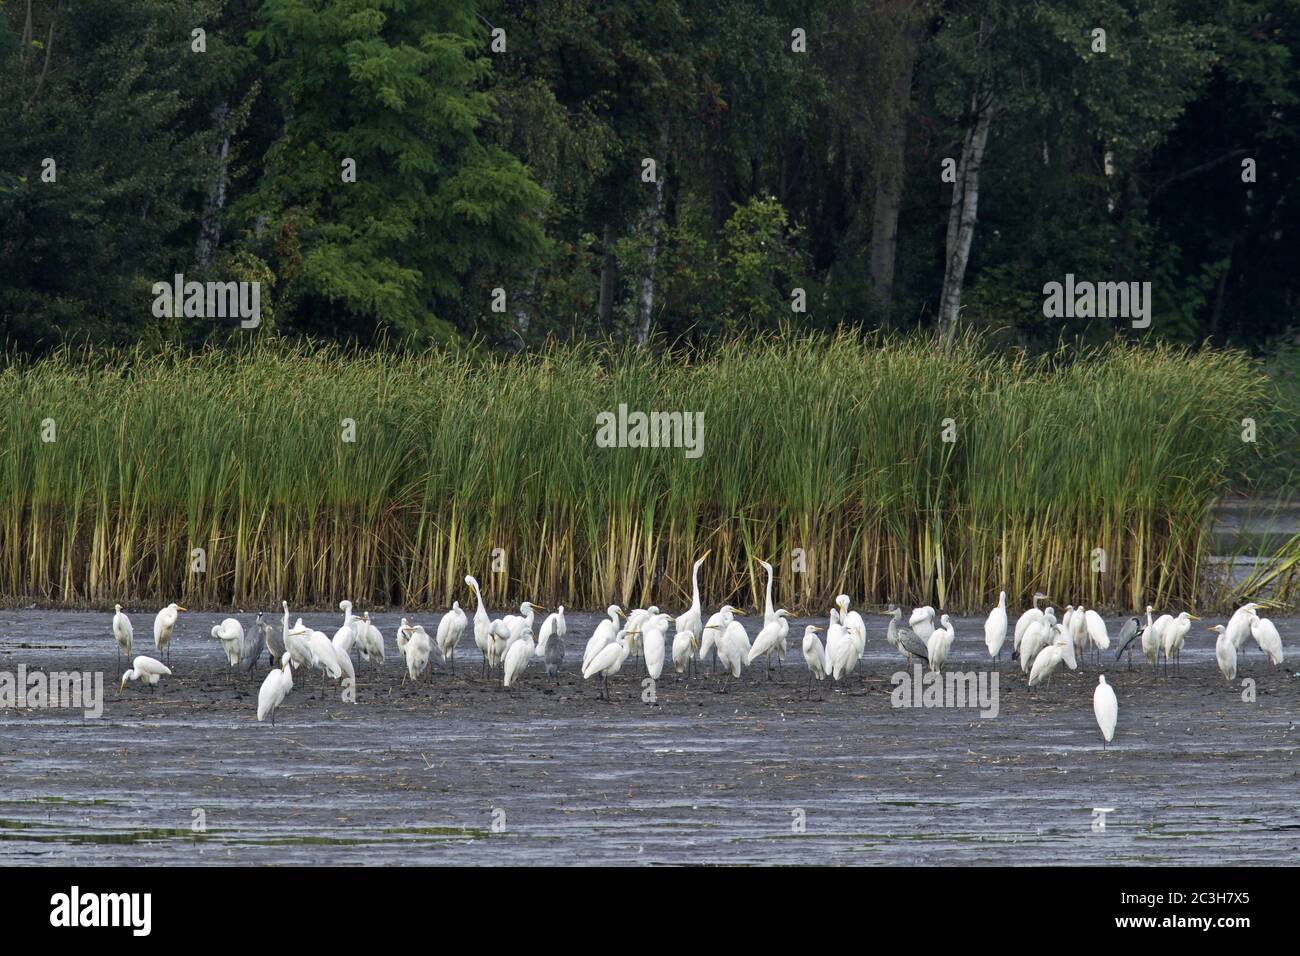 Great Egret at a drained pond Stock Photo